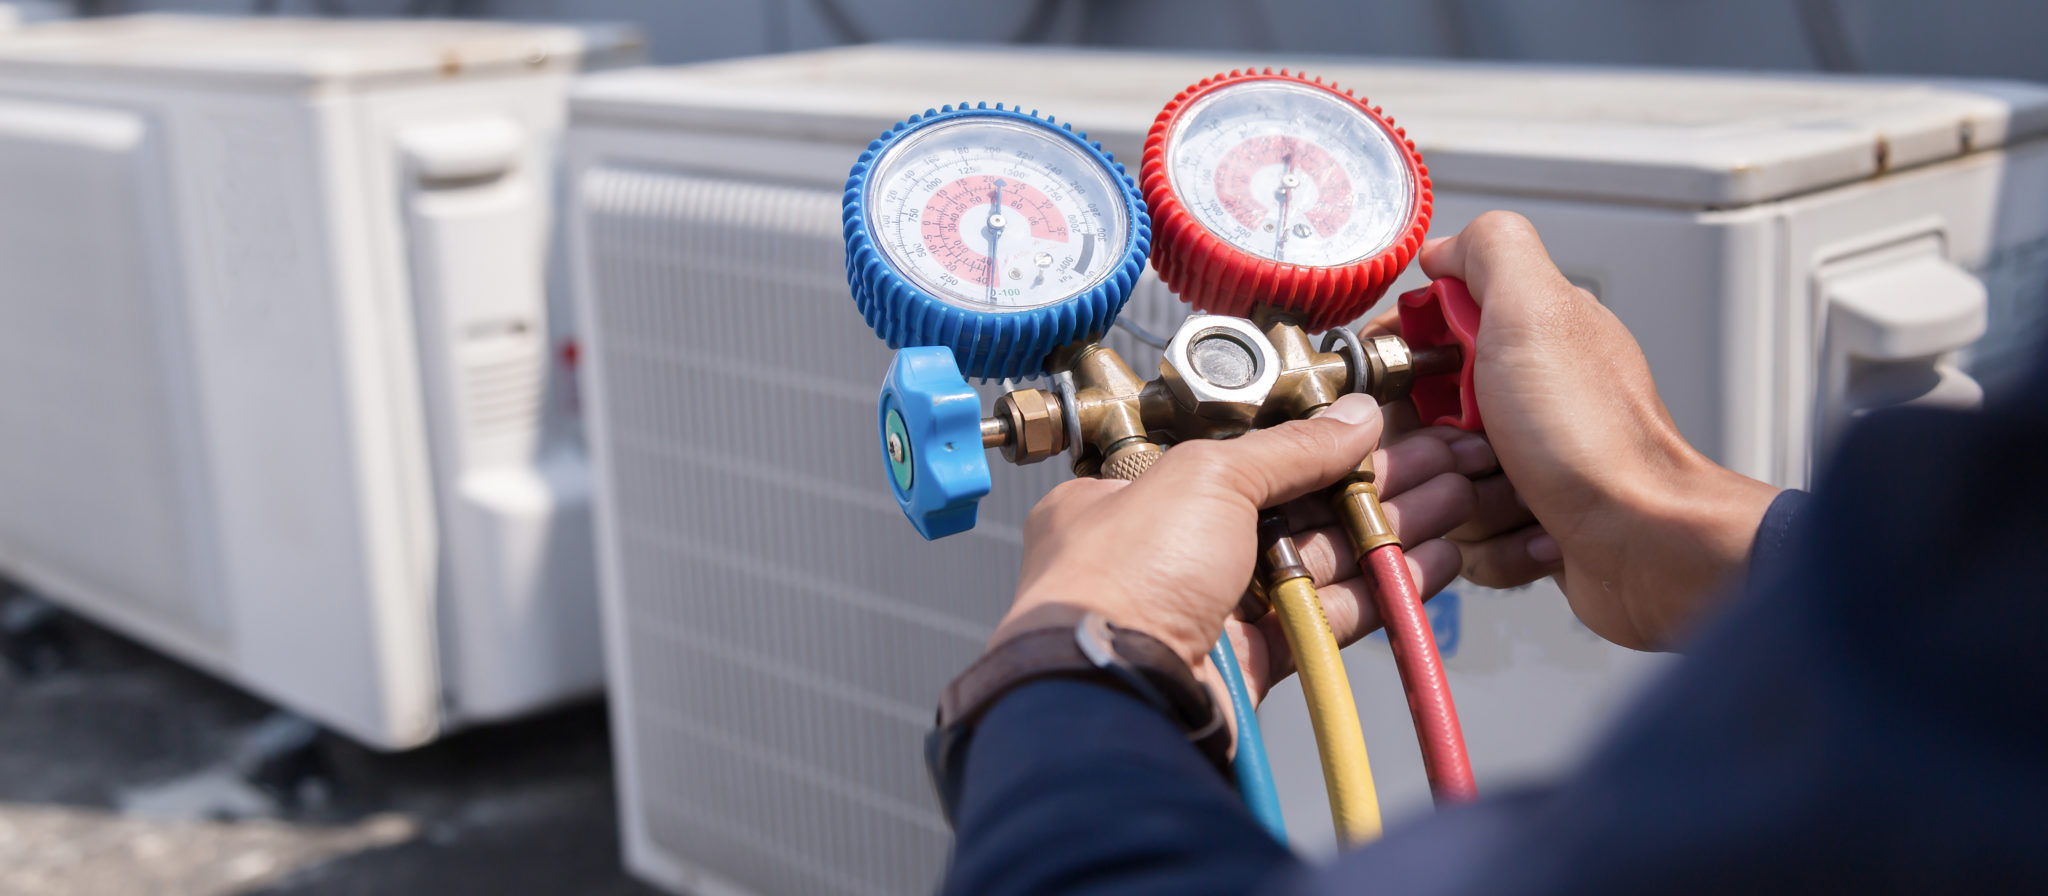 understanding-your-homes-heating-cooling-system